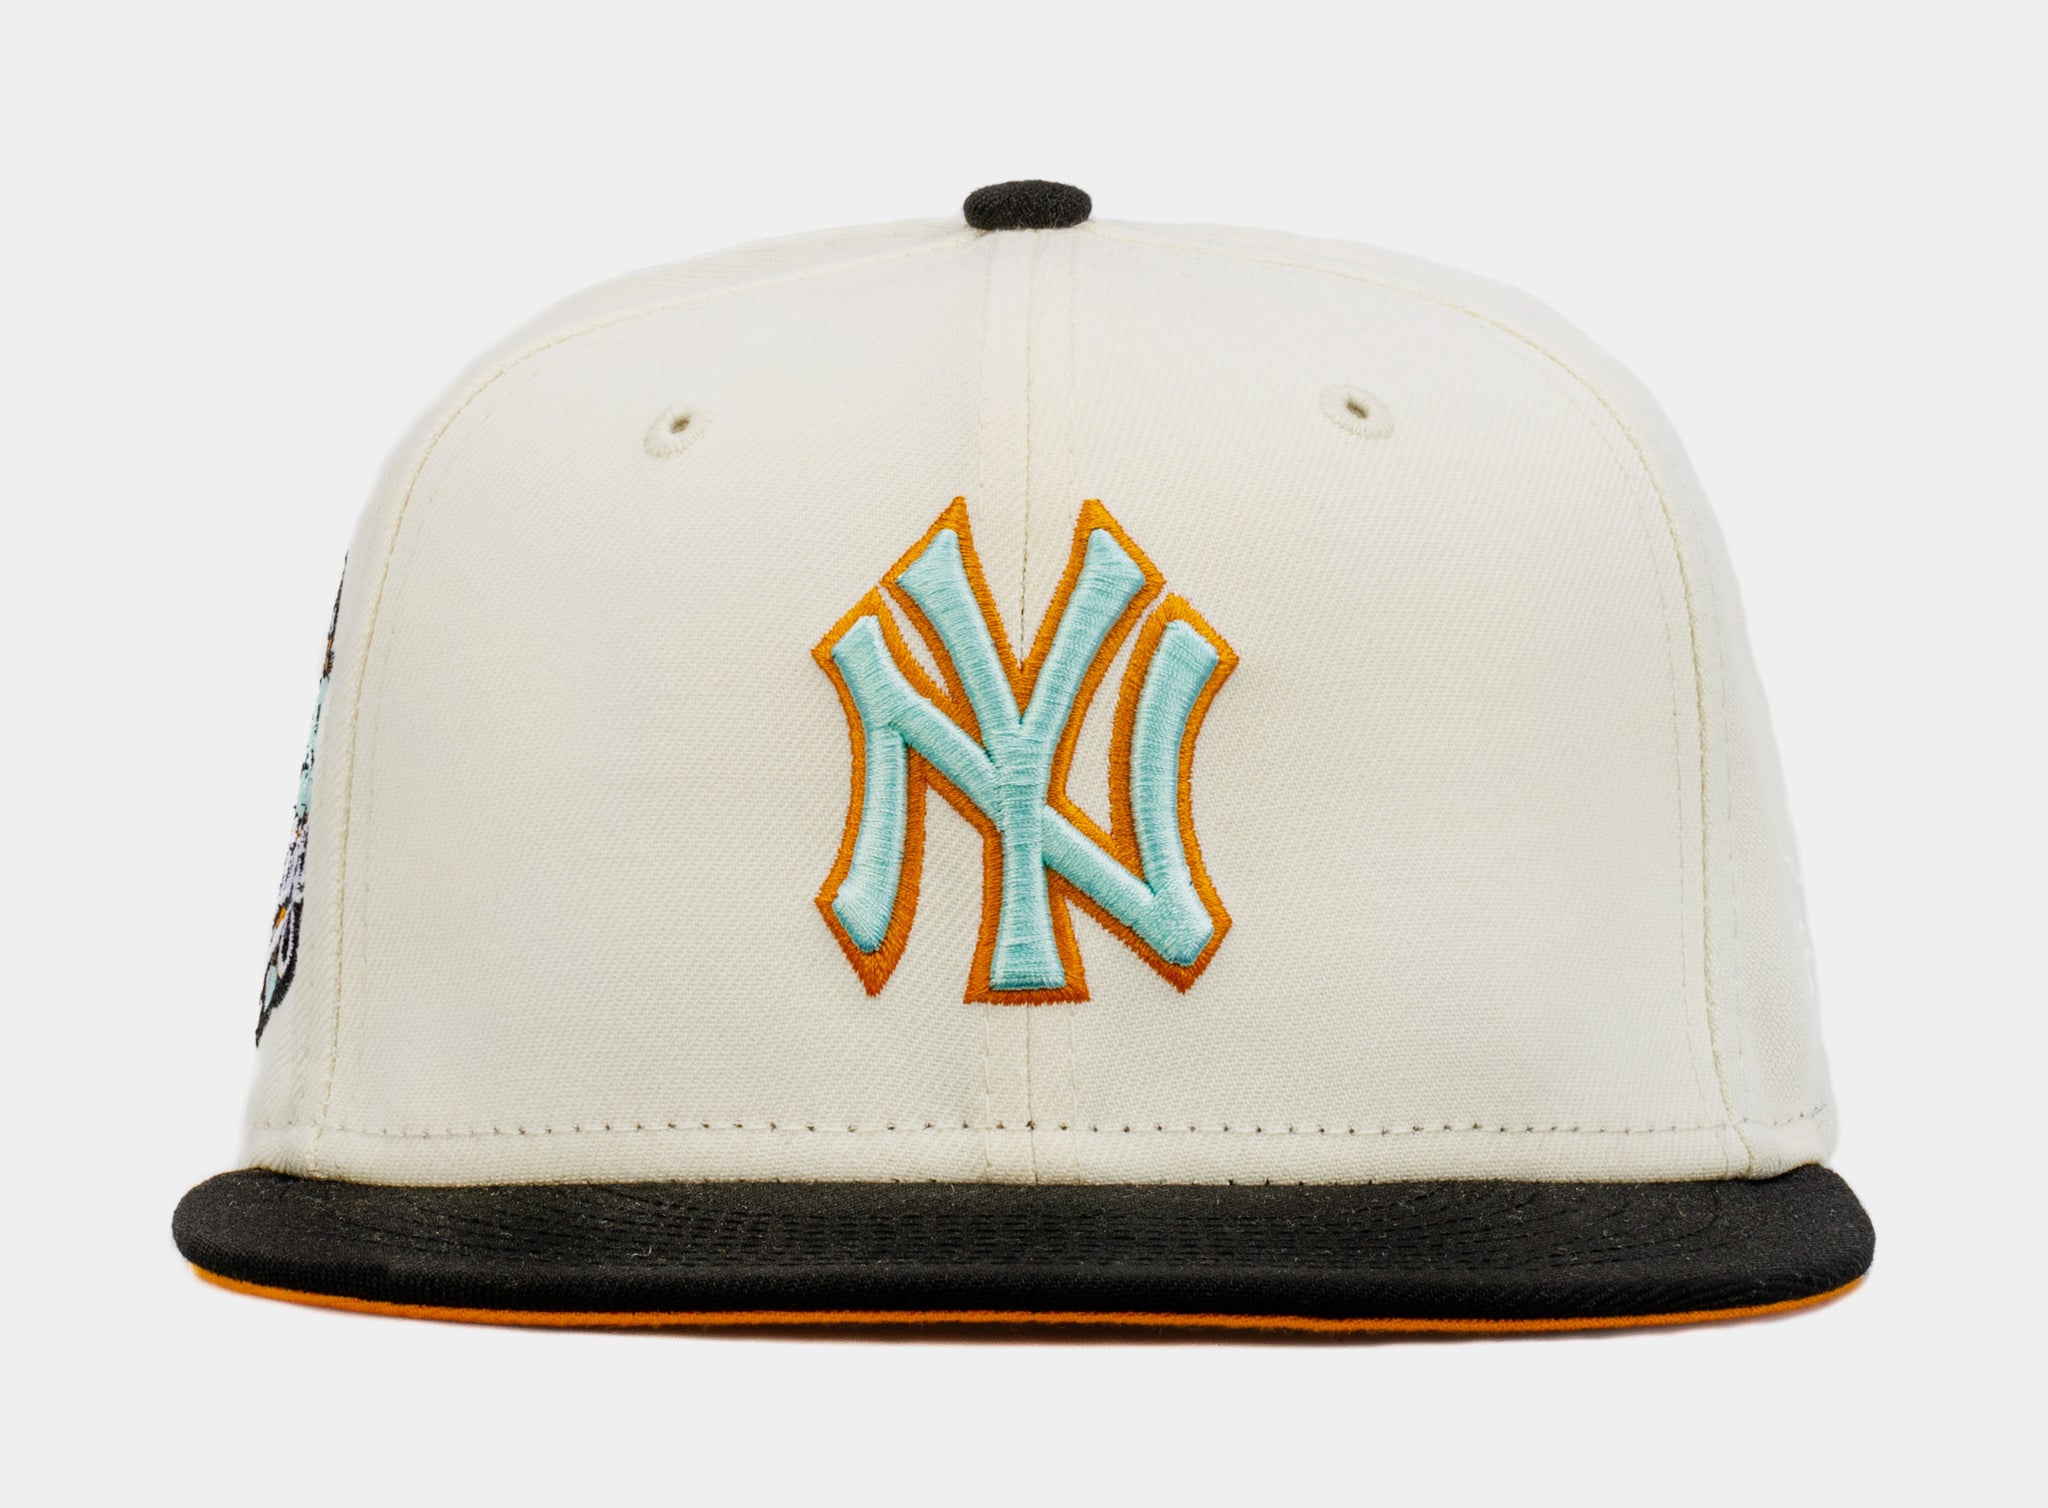 New Era New York Yankees 59Fifty Men's Fitted Hat Tan Brown